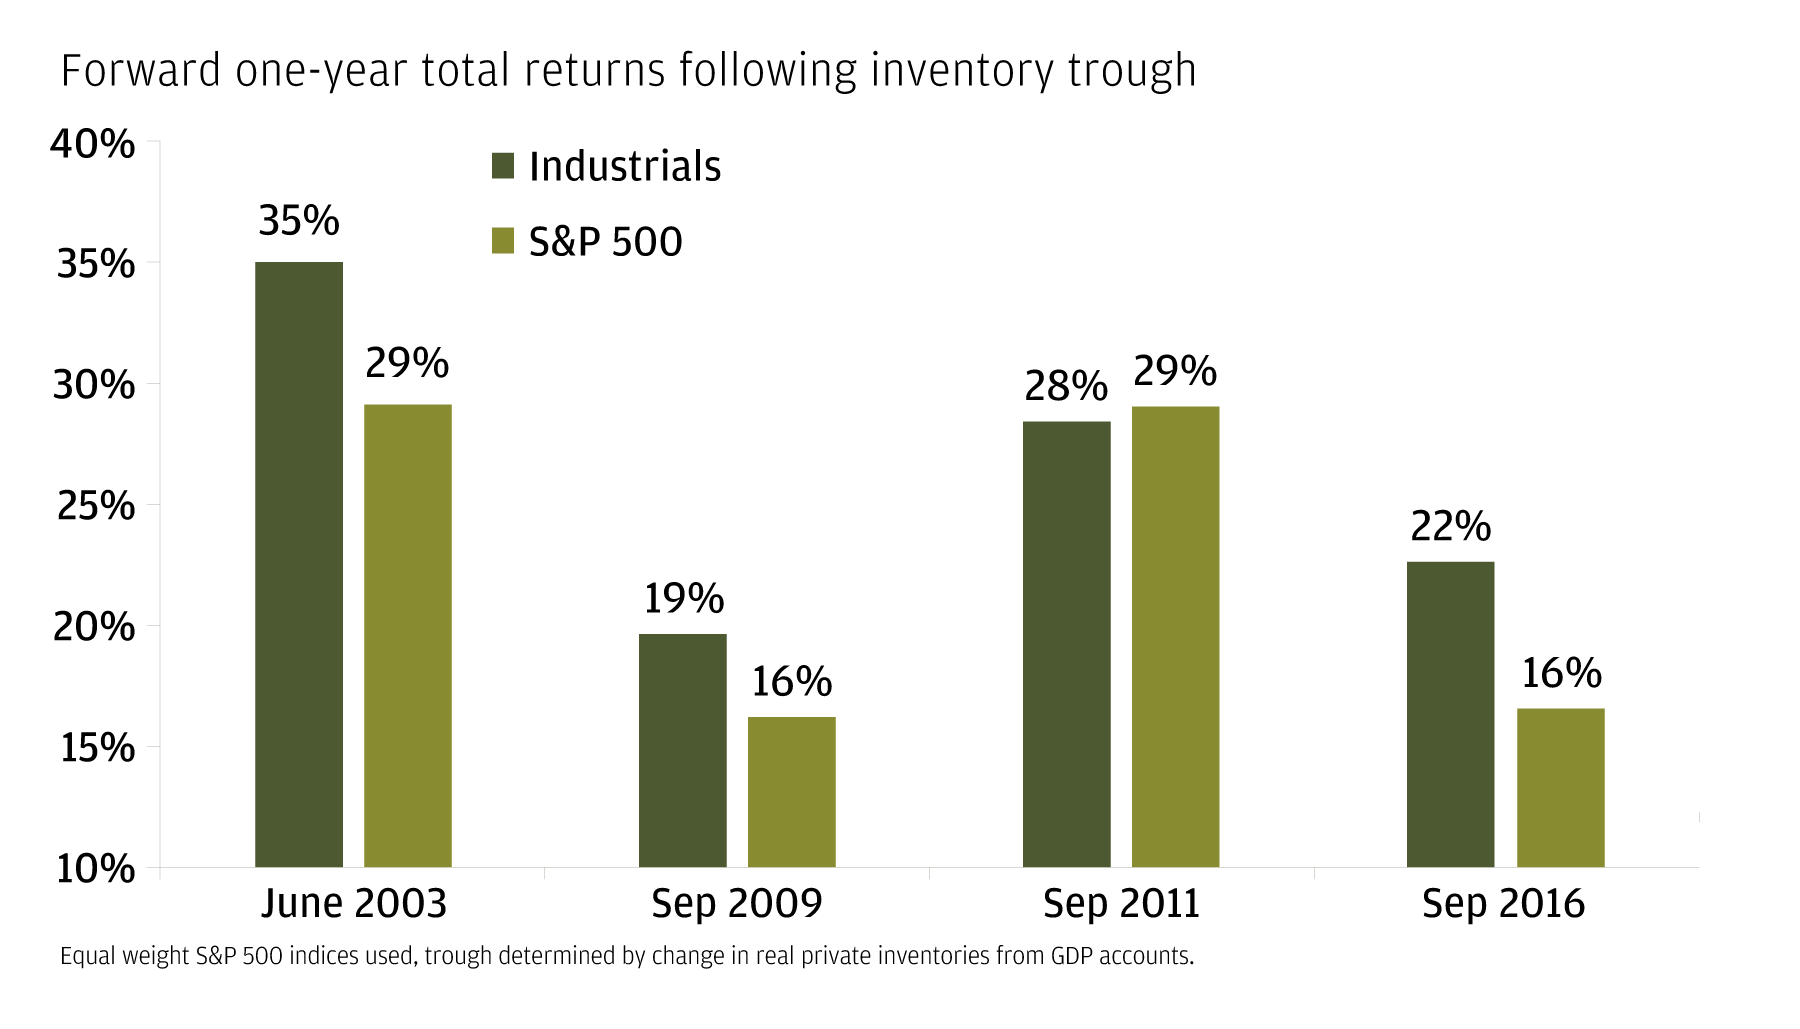 This bar chart shows 1-year forward returns for industrials and the S&P 500 (equal weighted indices) following inventory troughs. In 3 of the 4 examples, industrials outperformed.